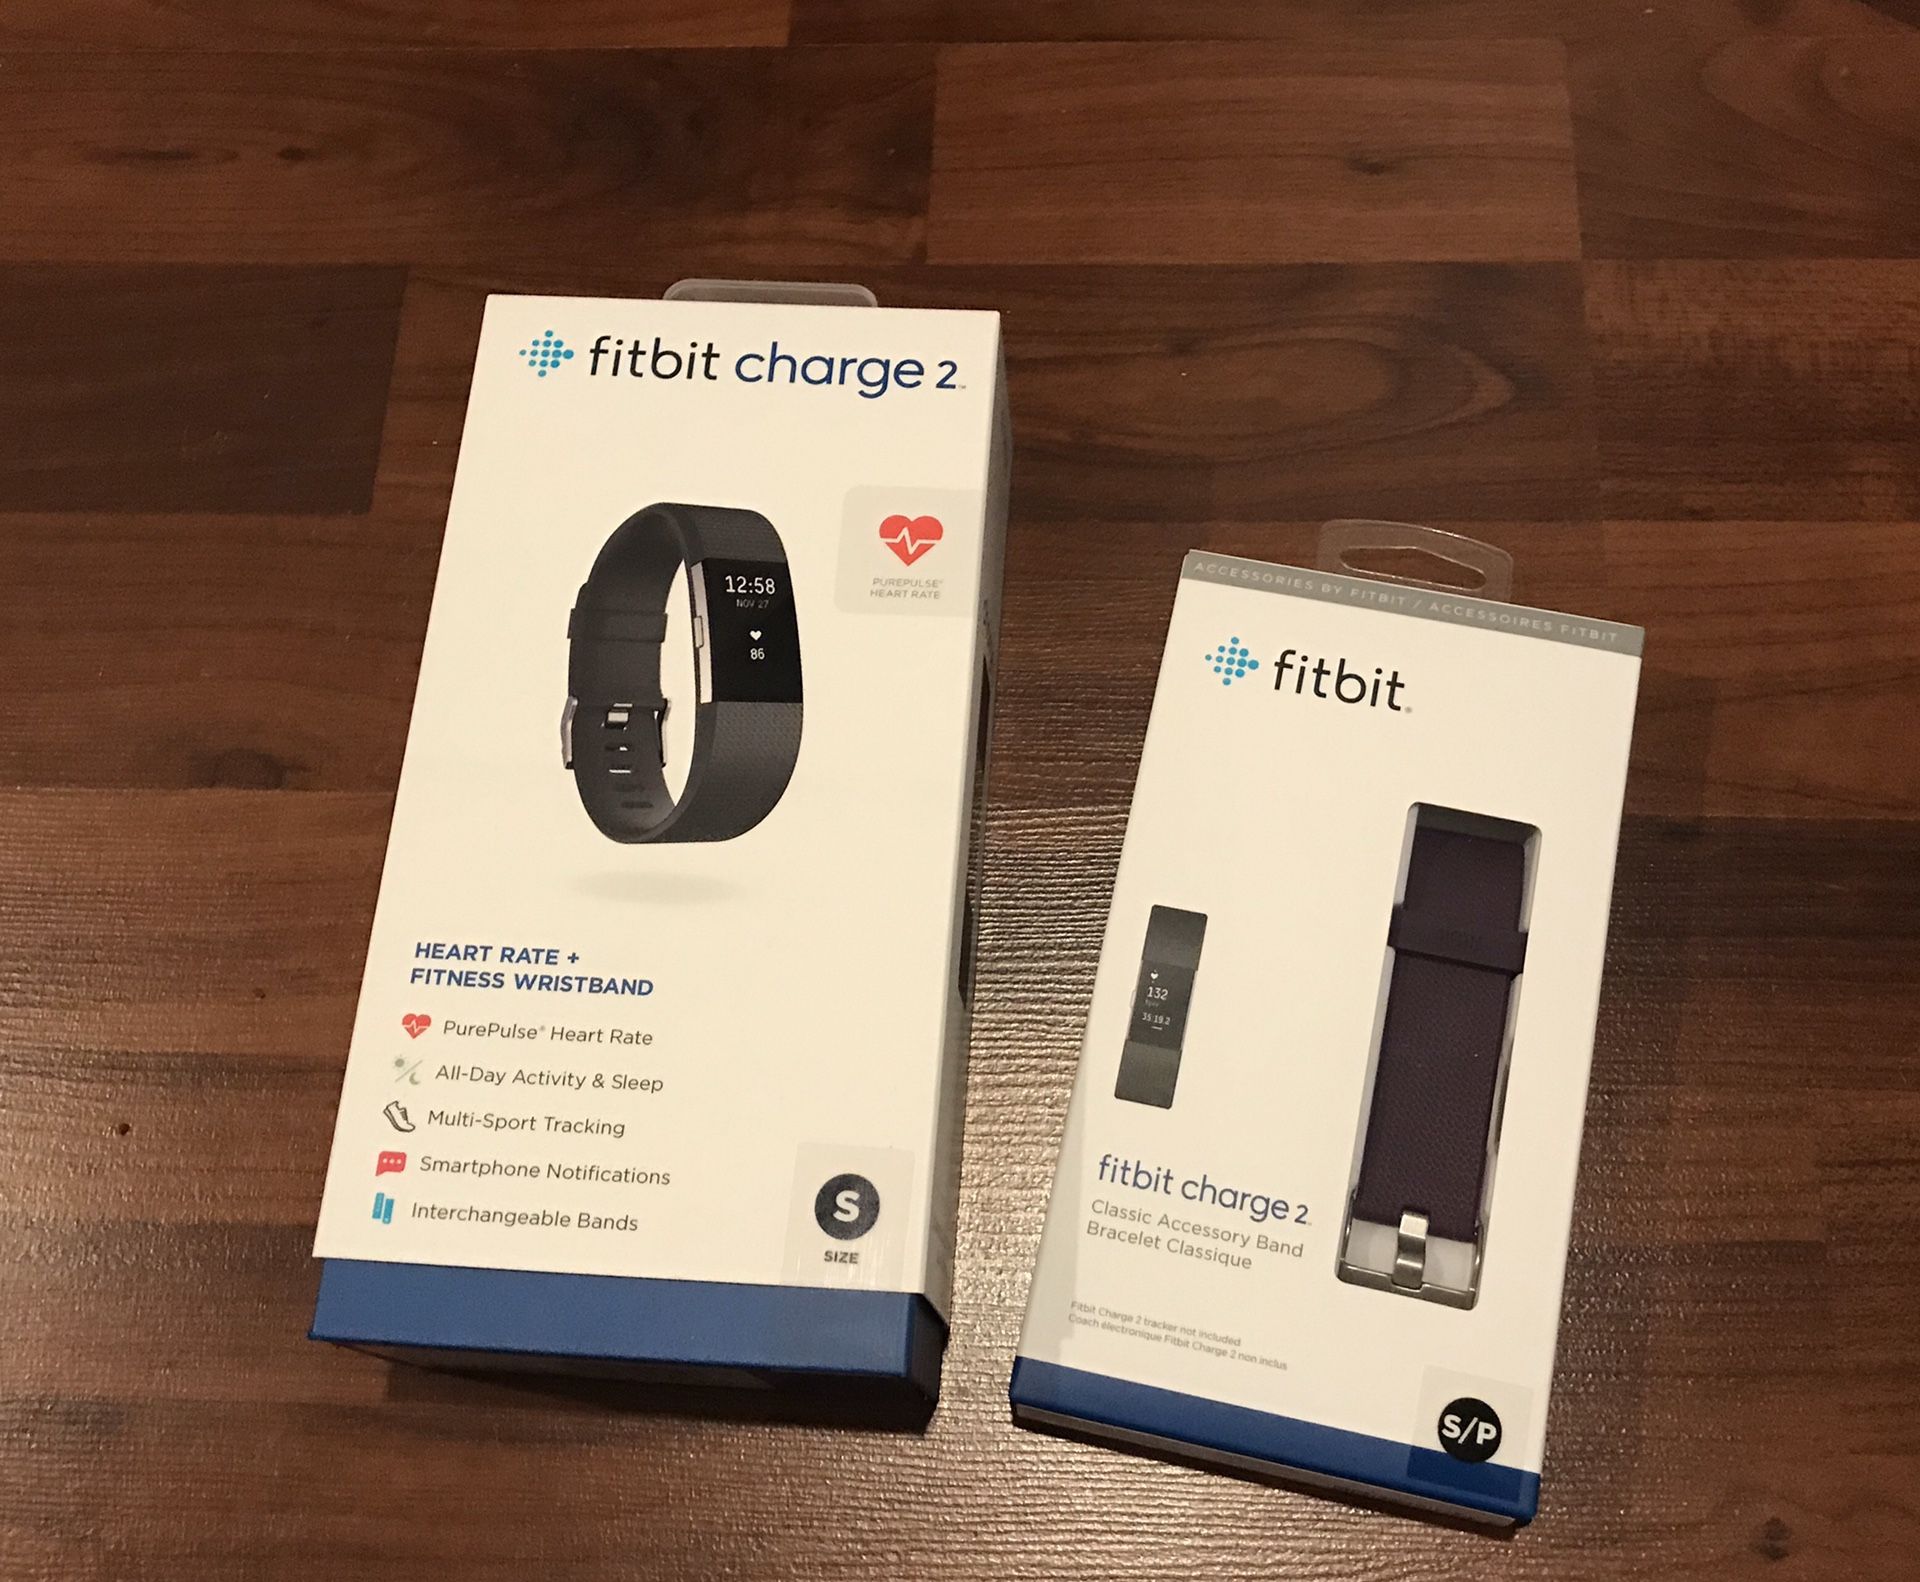 Fitbit Charge 2, size S